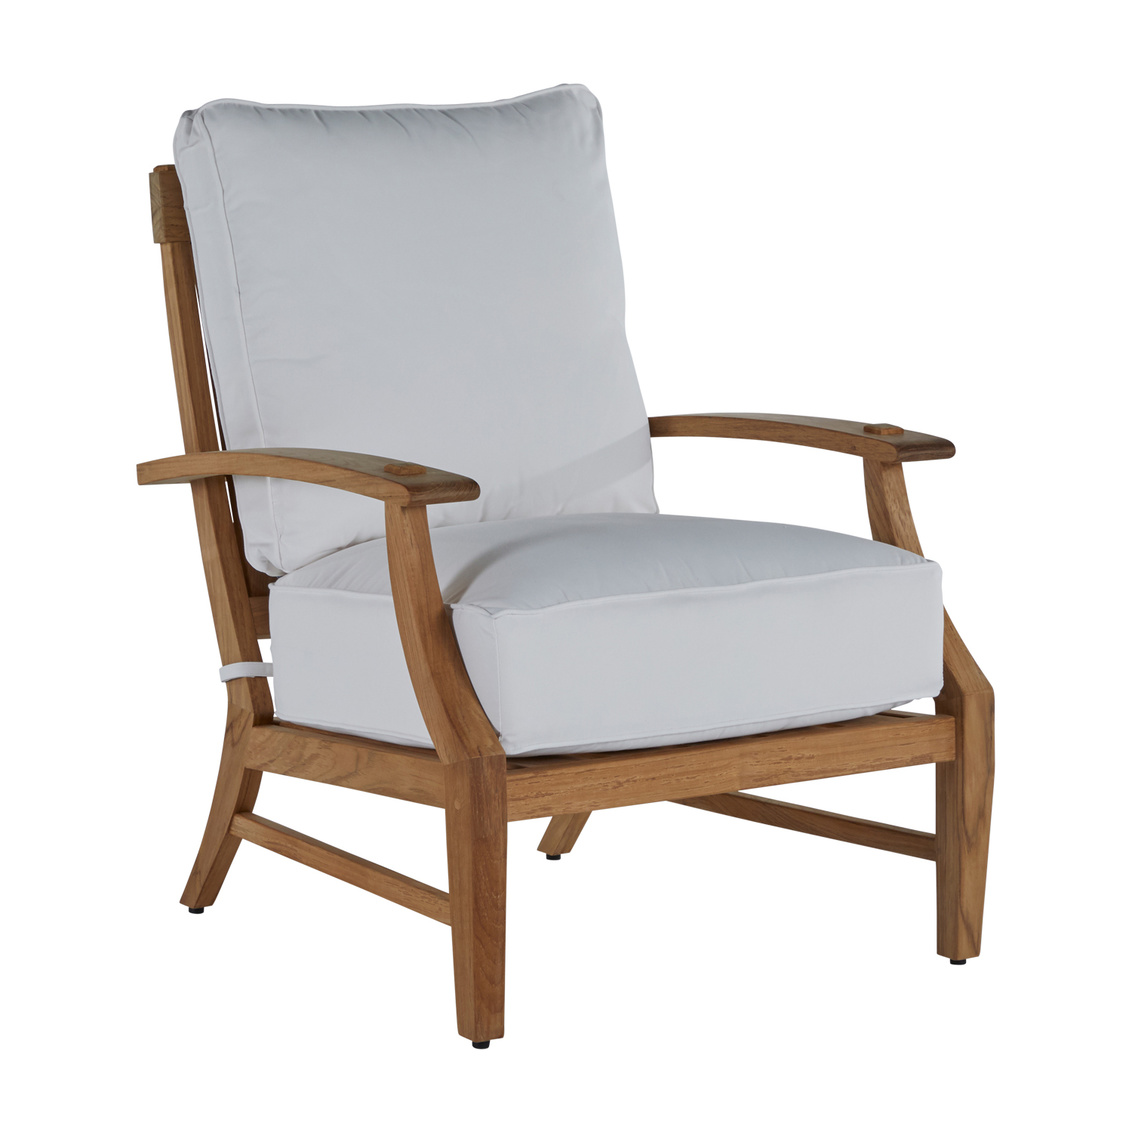 croquet teak lounge chair in natural teak – frame only product image